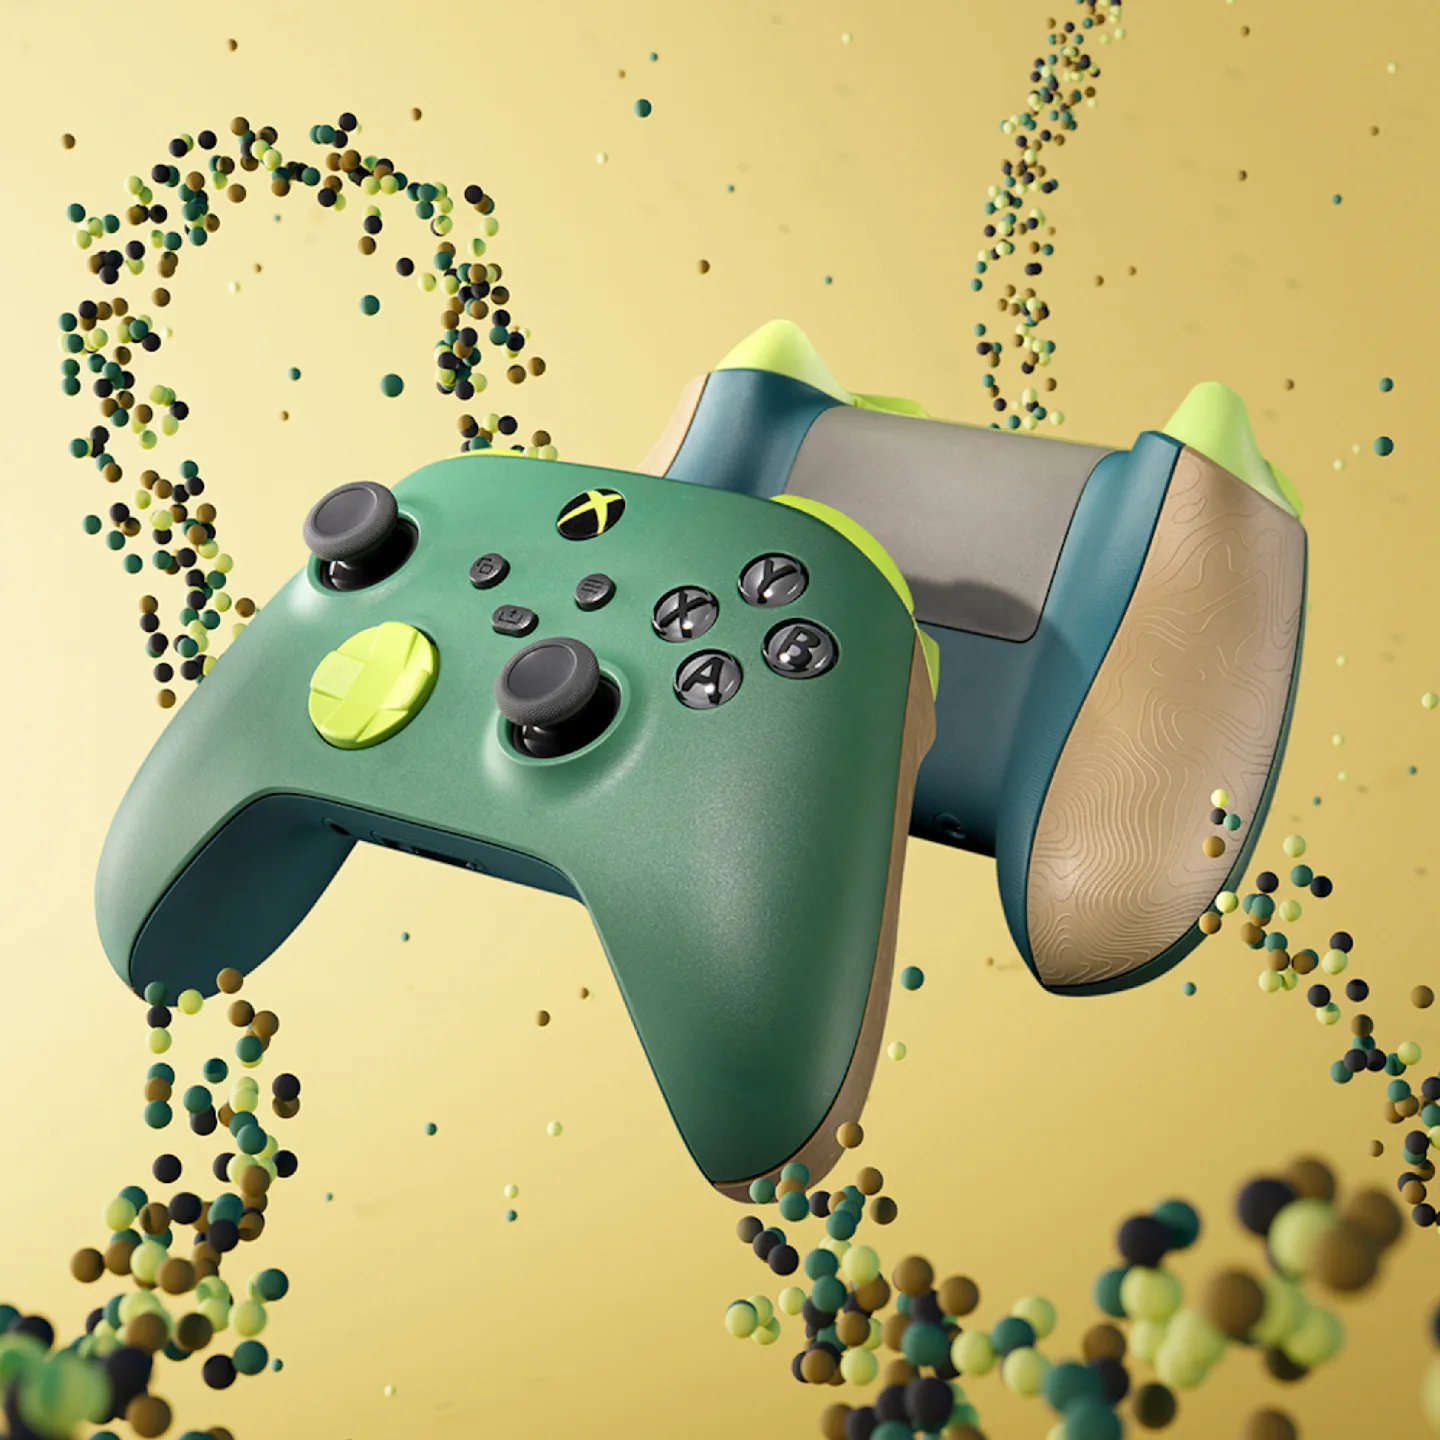 Image of the Xbox Remix controller floating over a gold background.